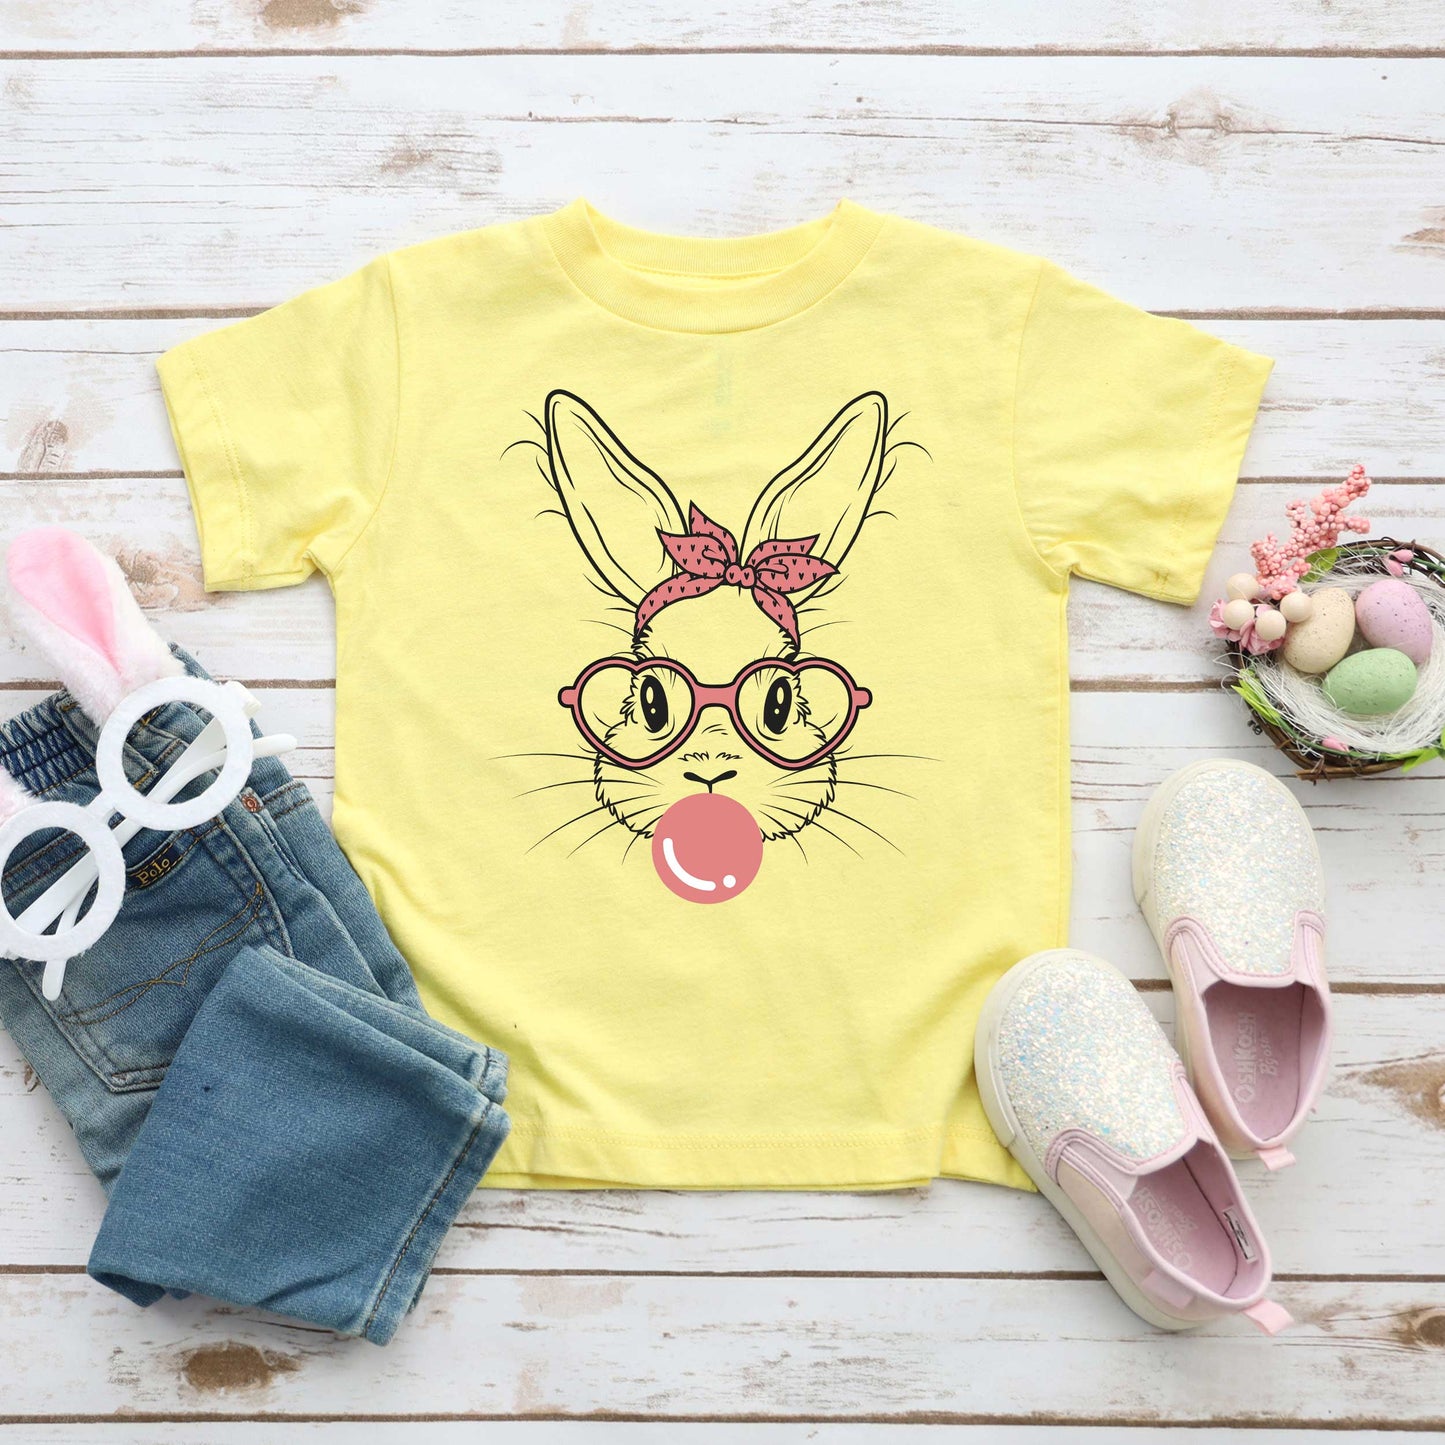 Easter Bunny With Bubble Gum | Toddler Short Sleeve Crew Neck